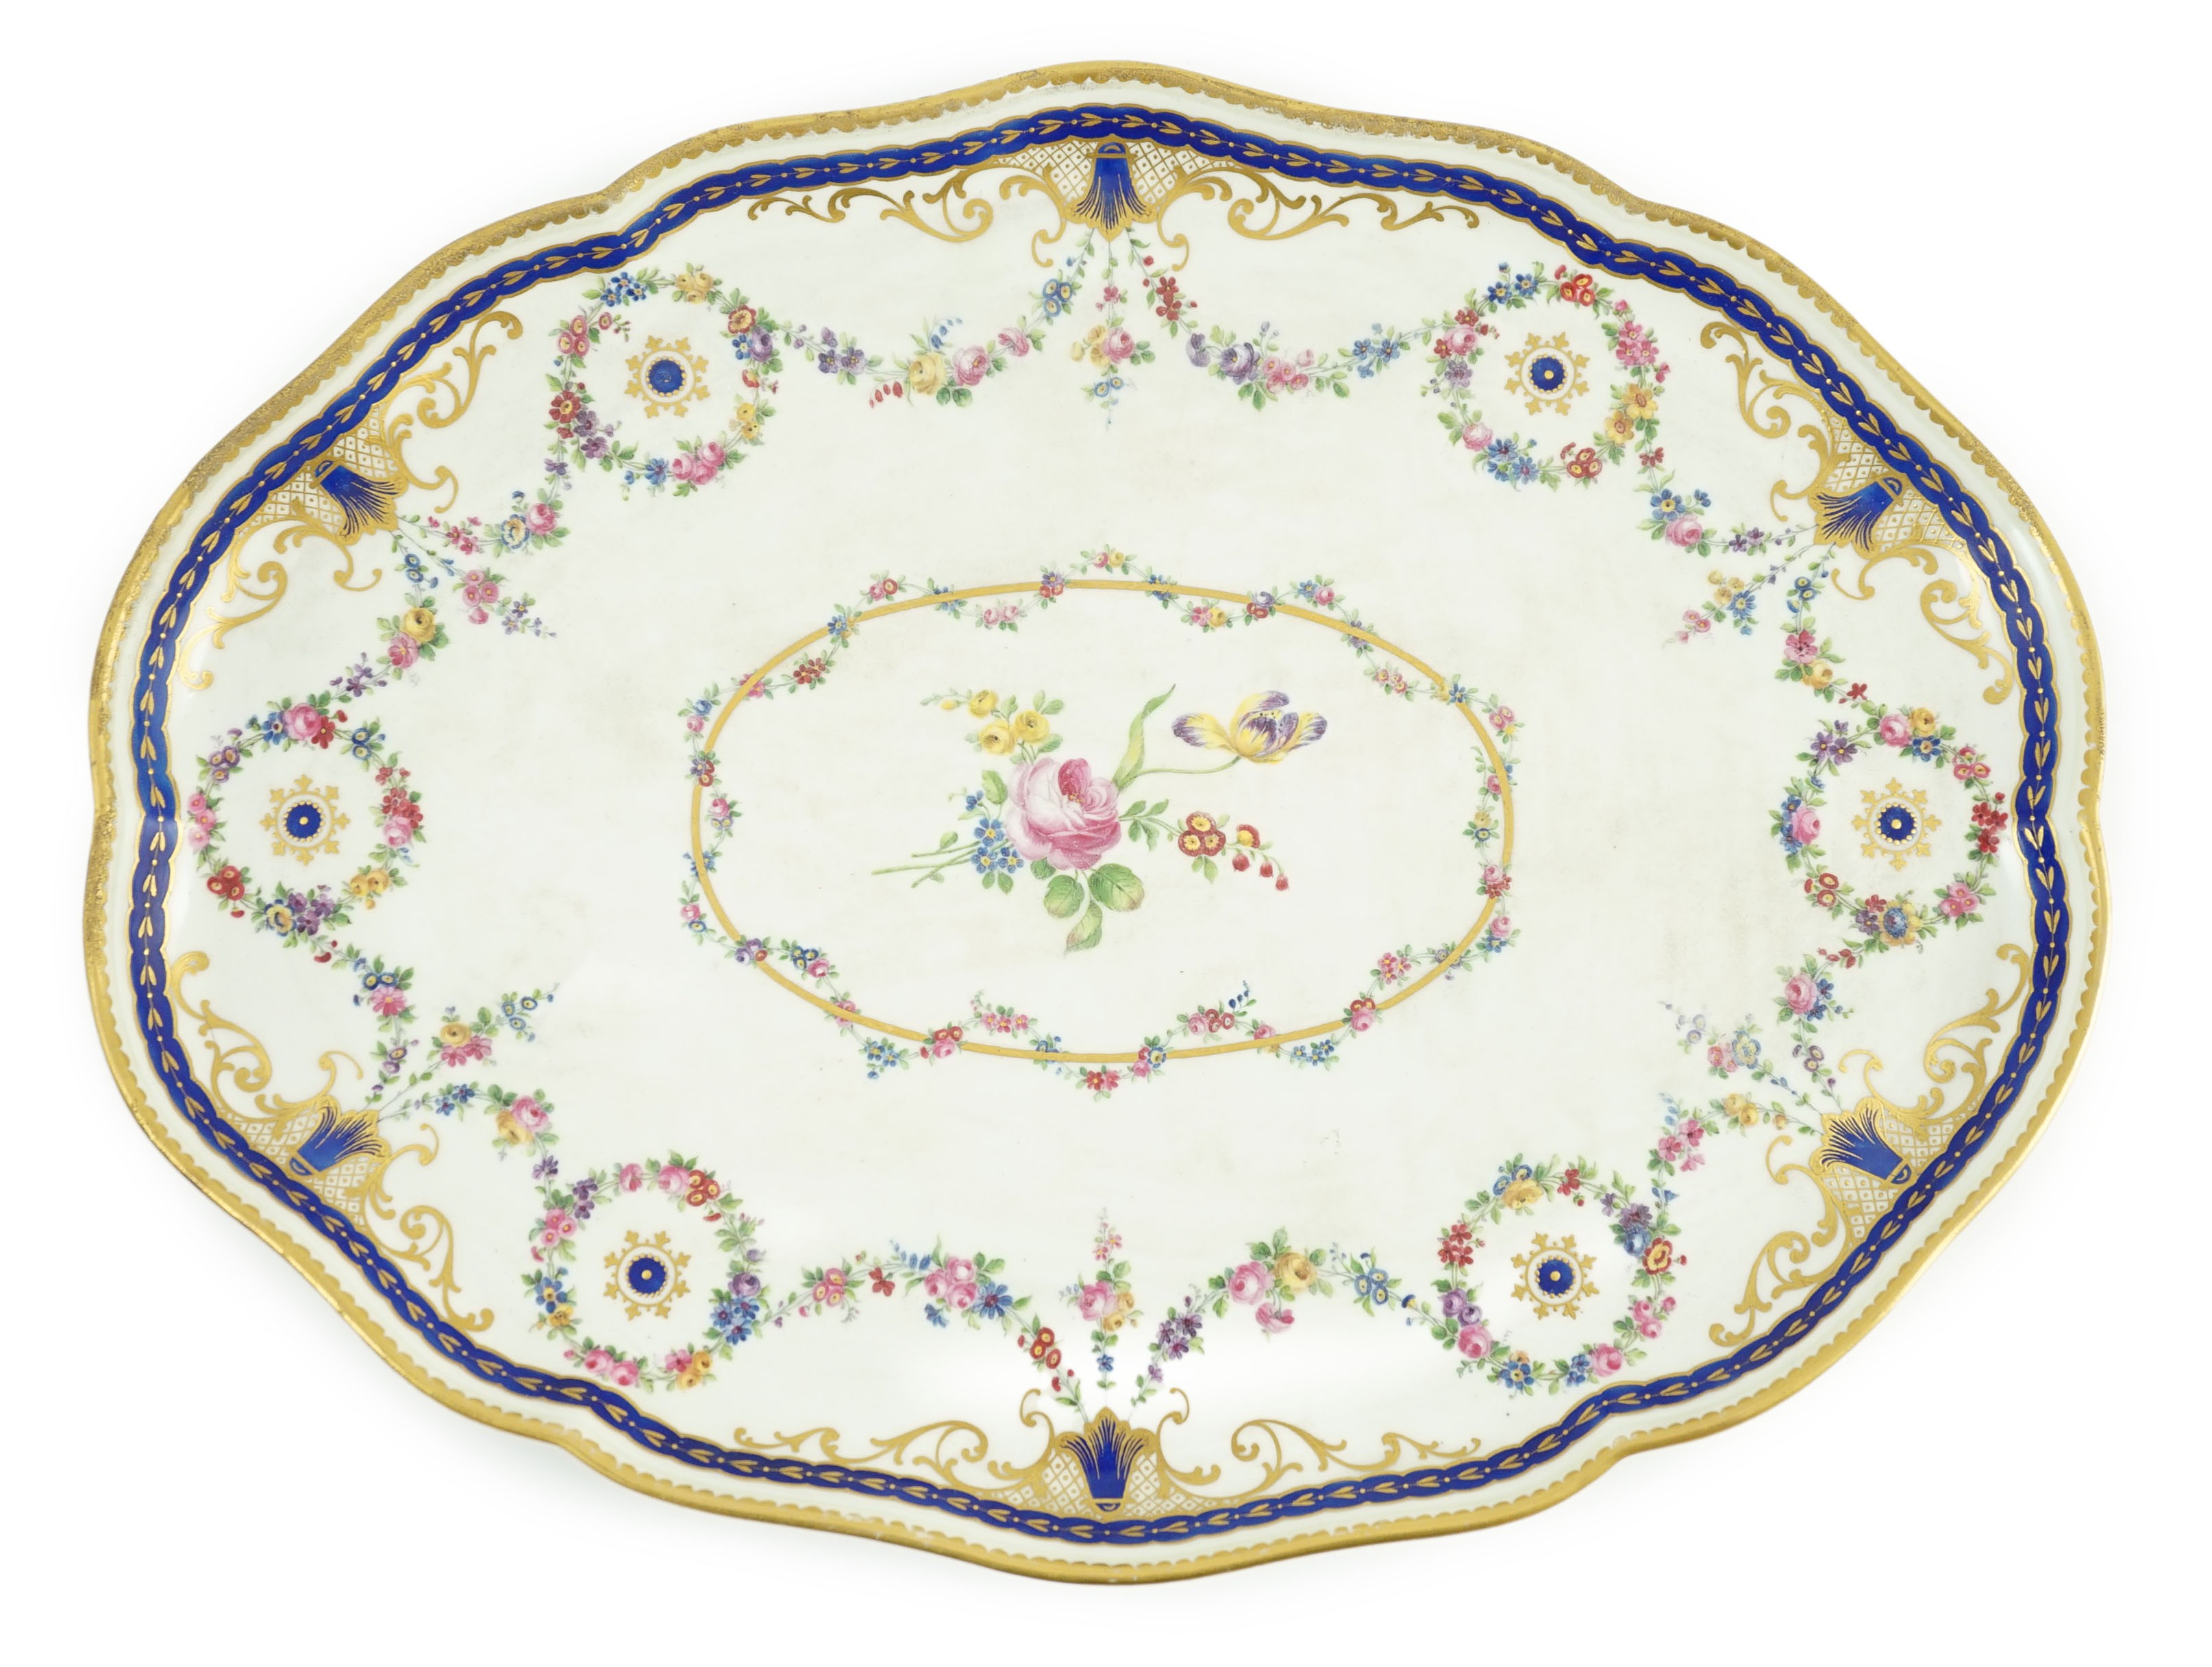 A Sevres porcelain shaped oval tray, date code for 1754, 33.5cm wide